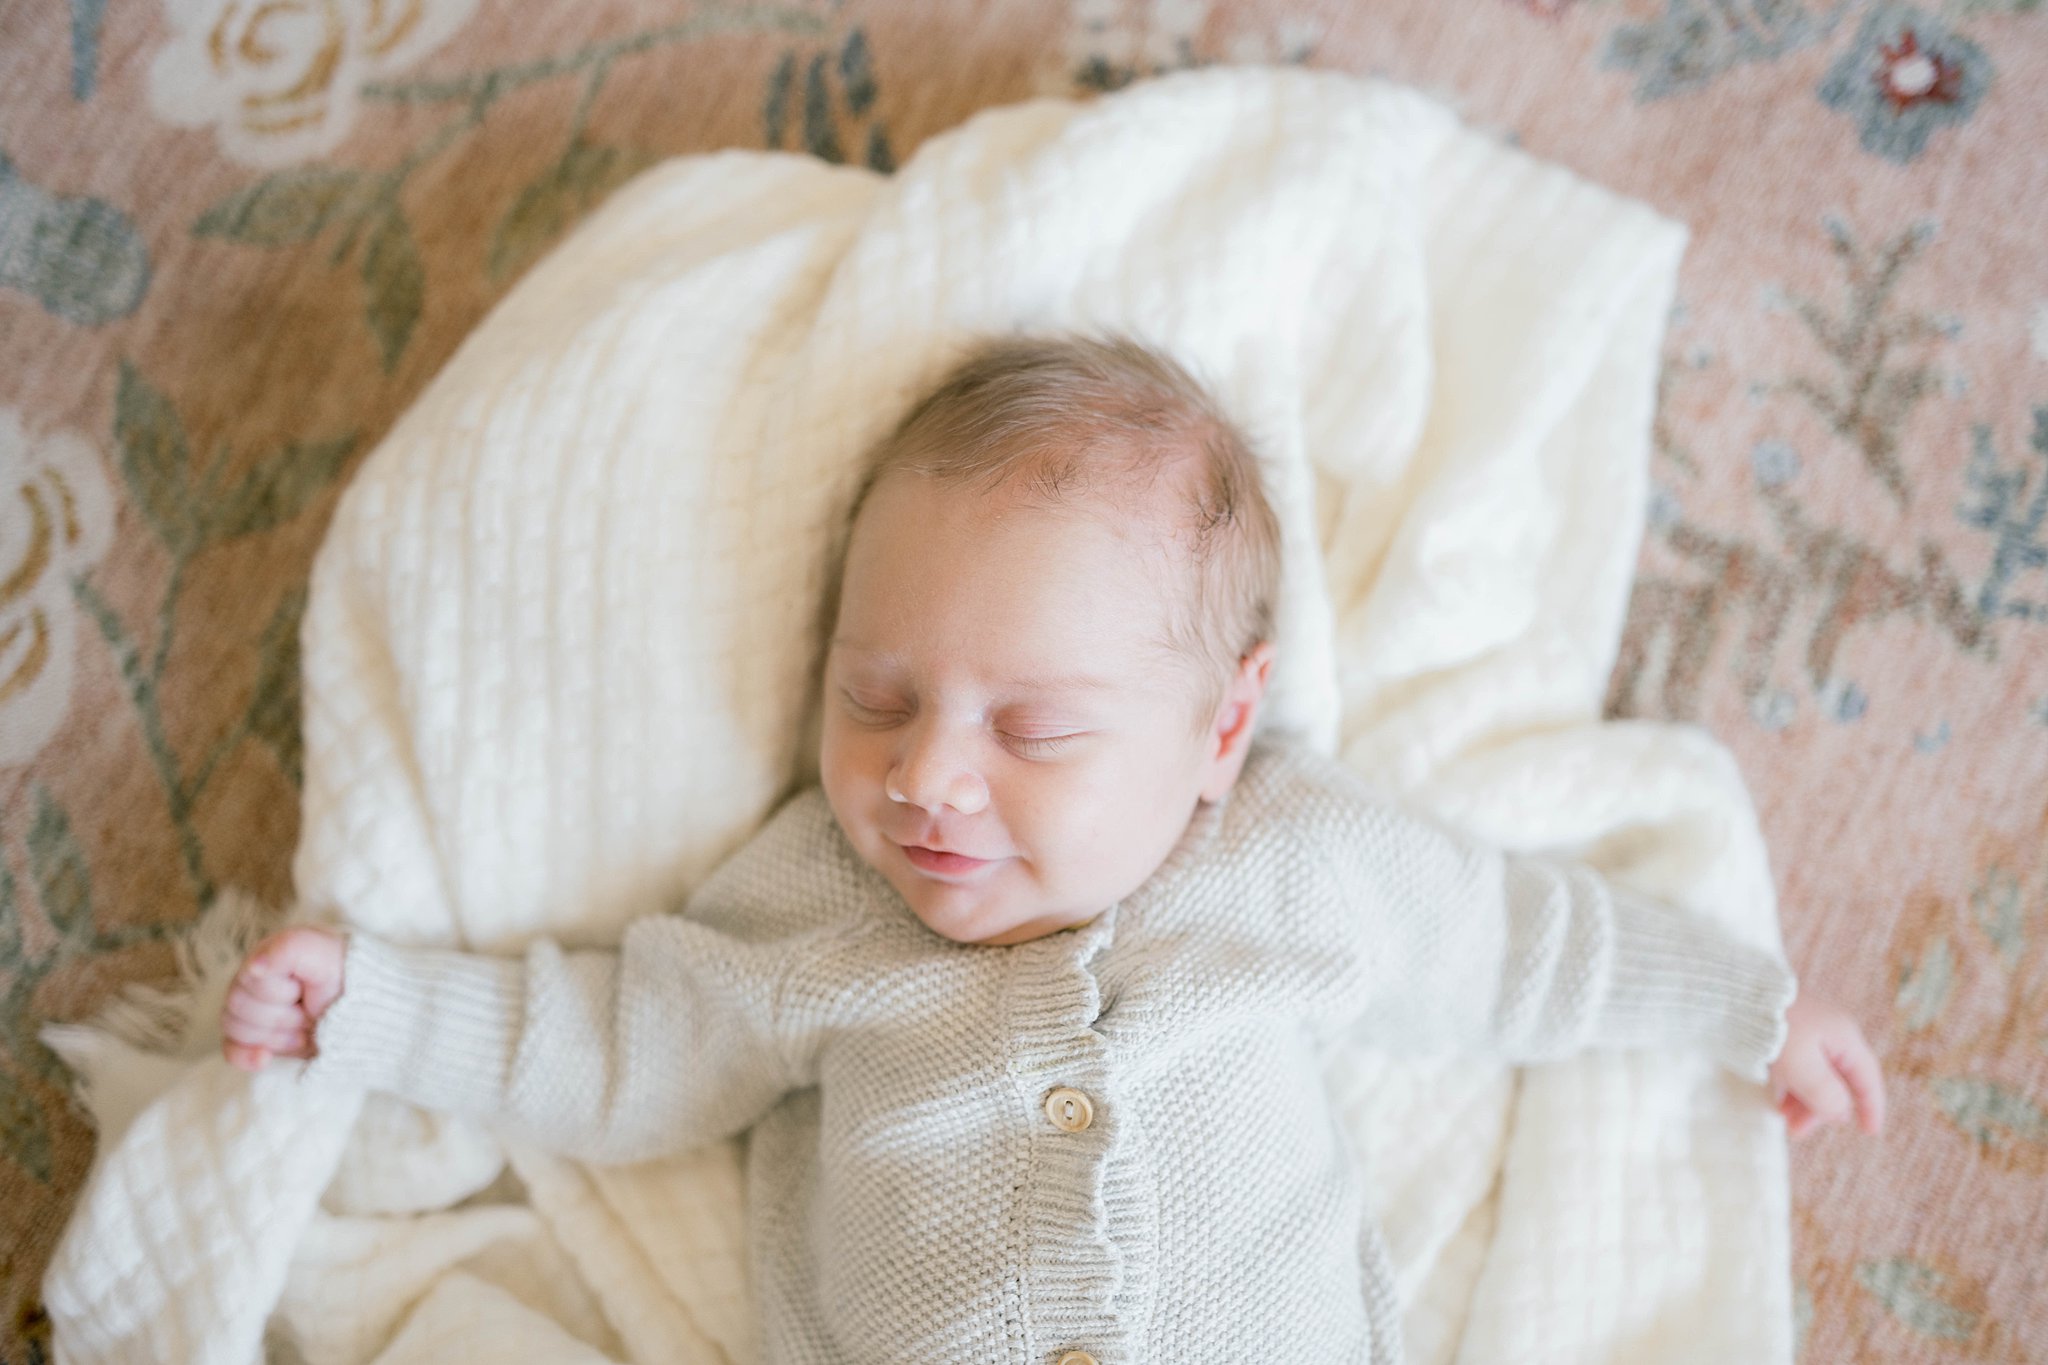 A newborn baby in a white knit sweater sleeps with arms out on a white blanket Lay’s World